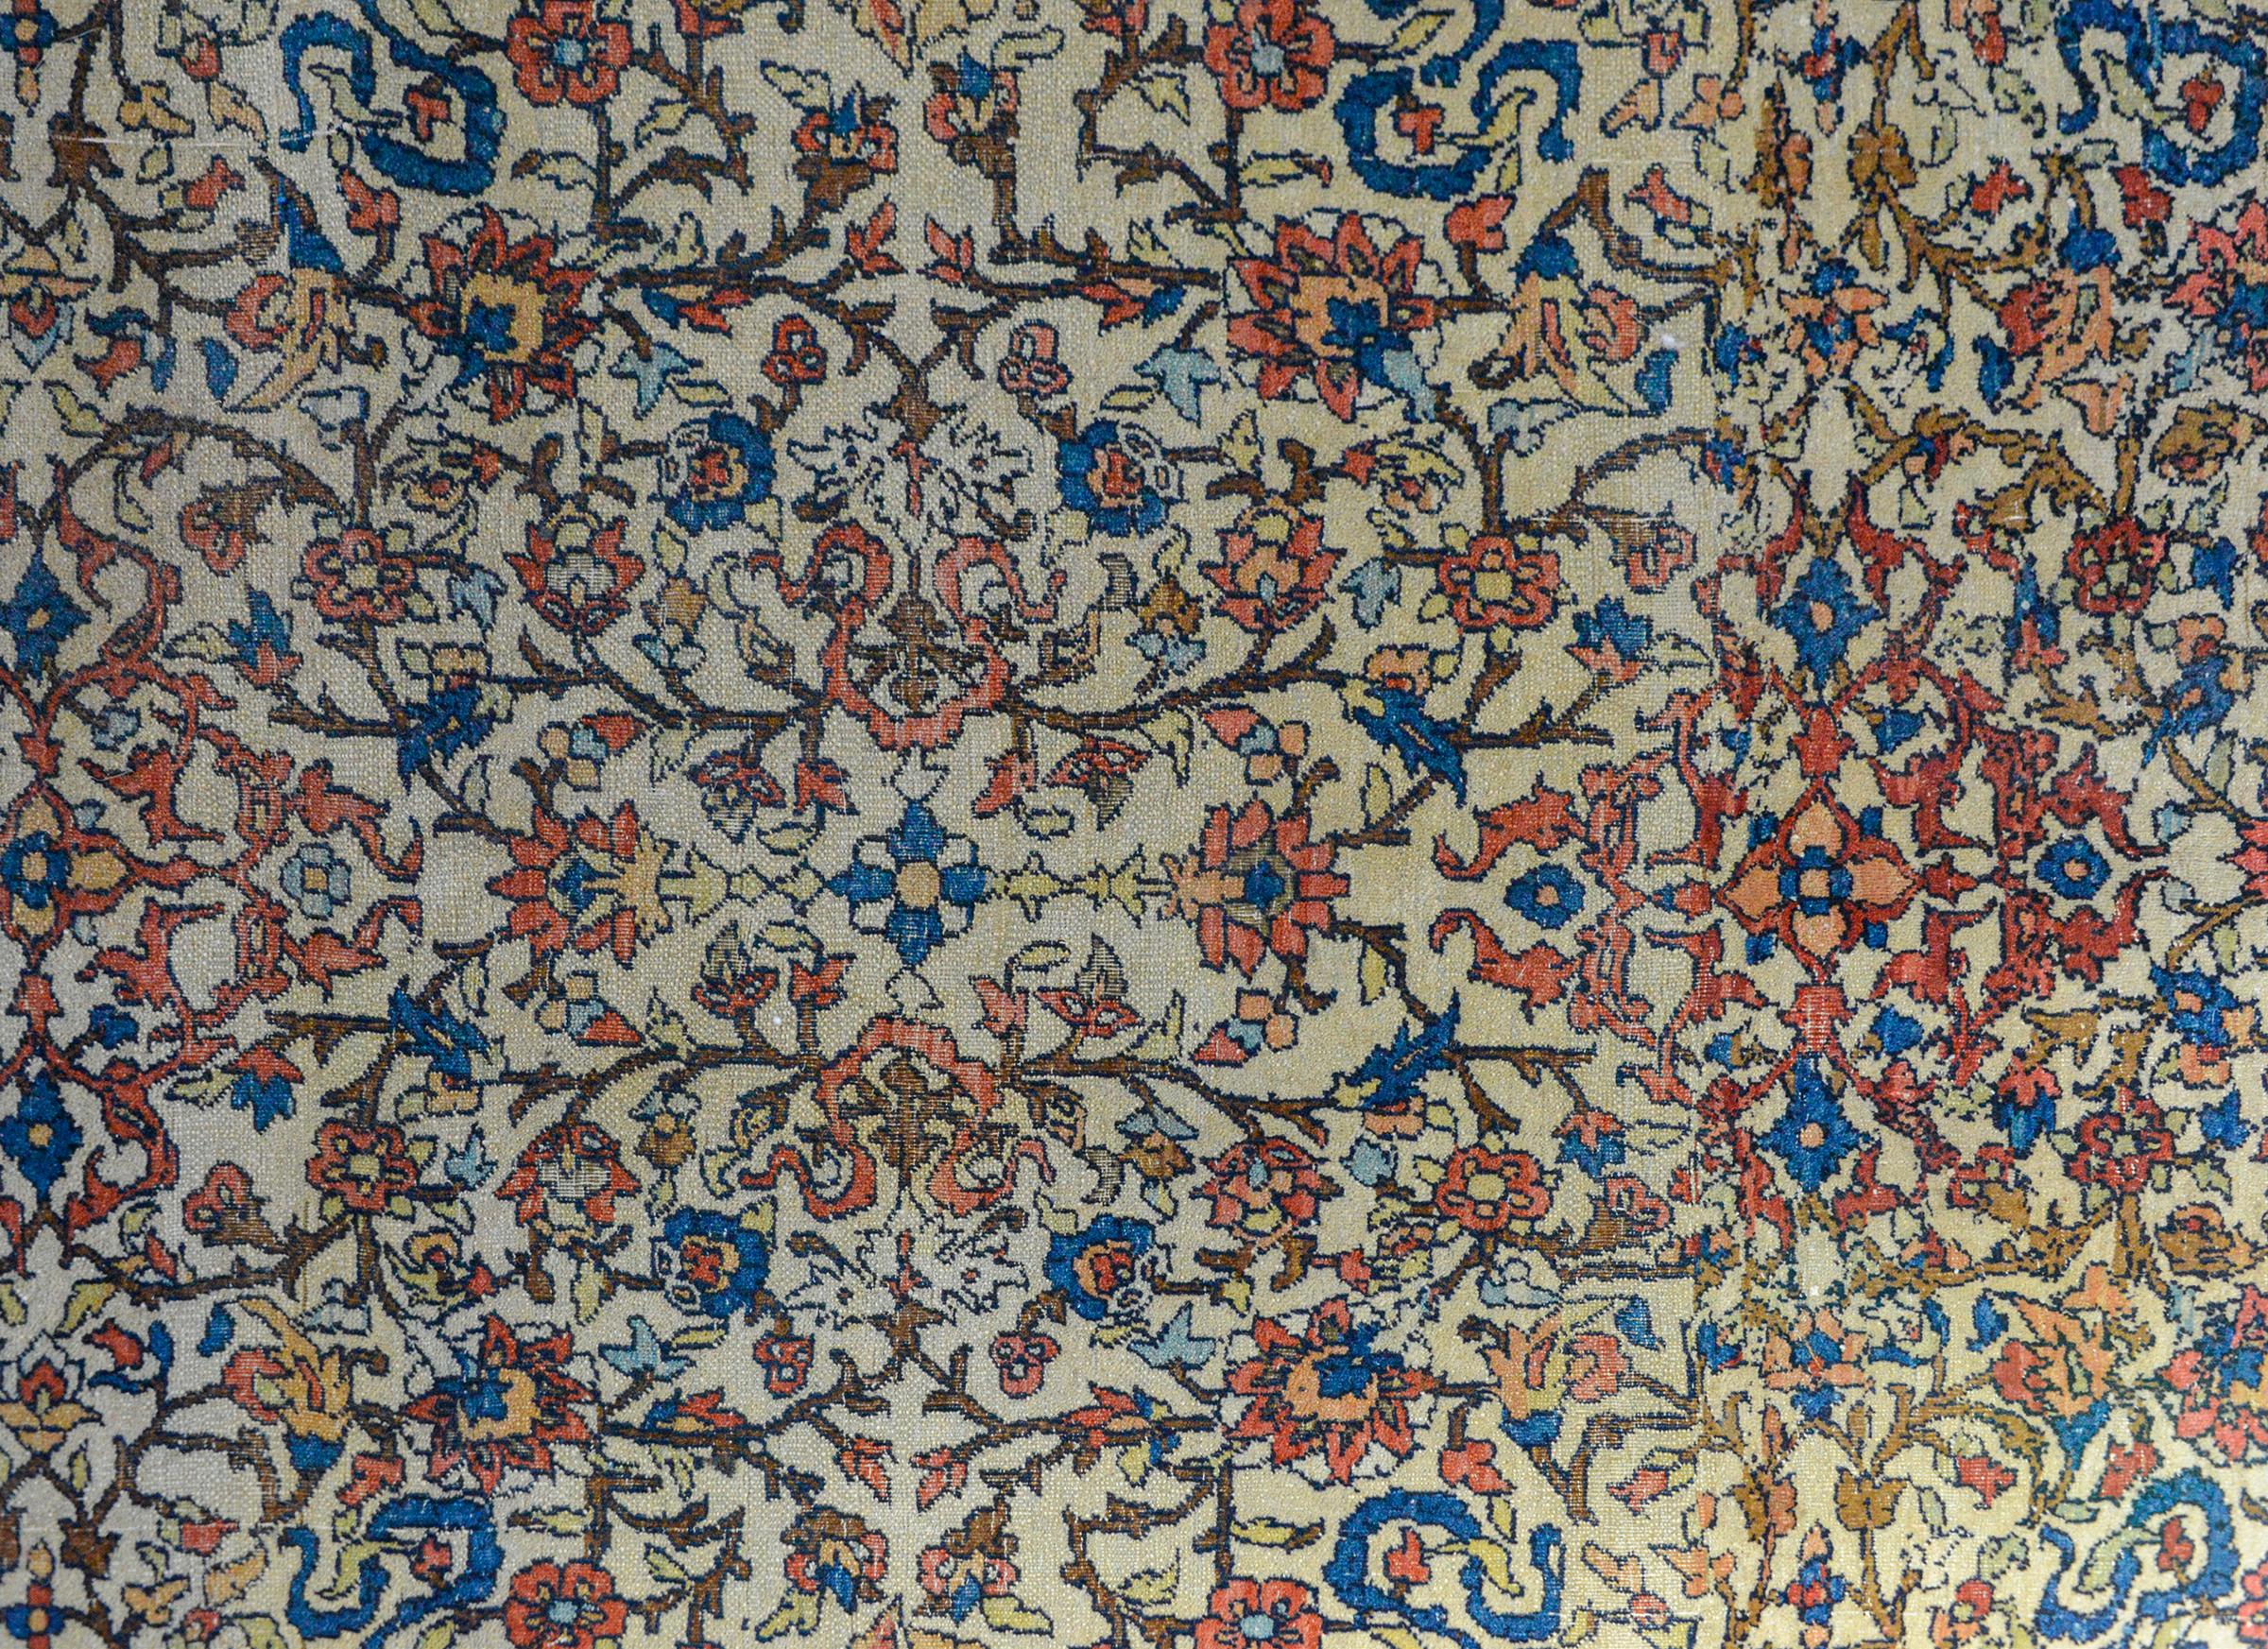 An incredible early 20th century Persian Bakhtiari rug with an all-over floral and scrolling vine pattern woven in crimson, pink, indigo, gold, and brown, all against a cream background. The border is unusual with a large-scale floral outer border